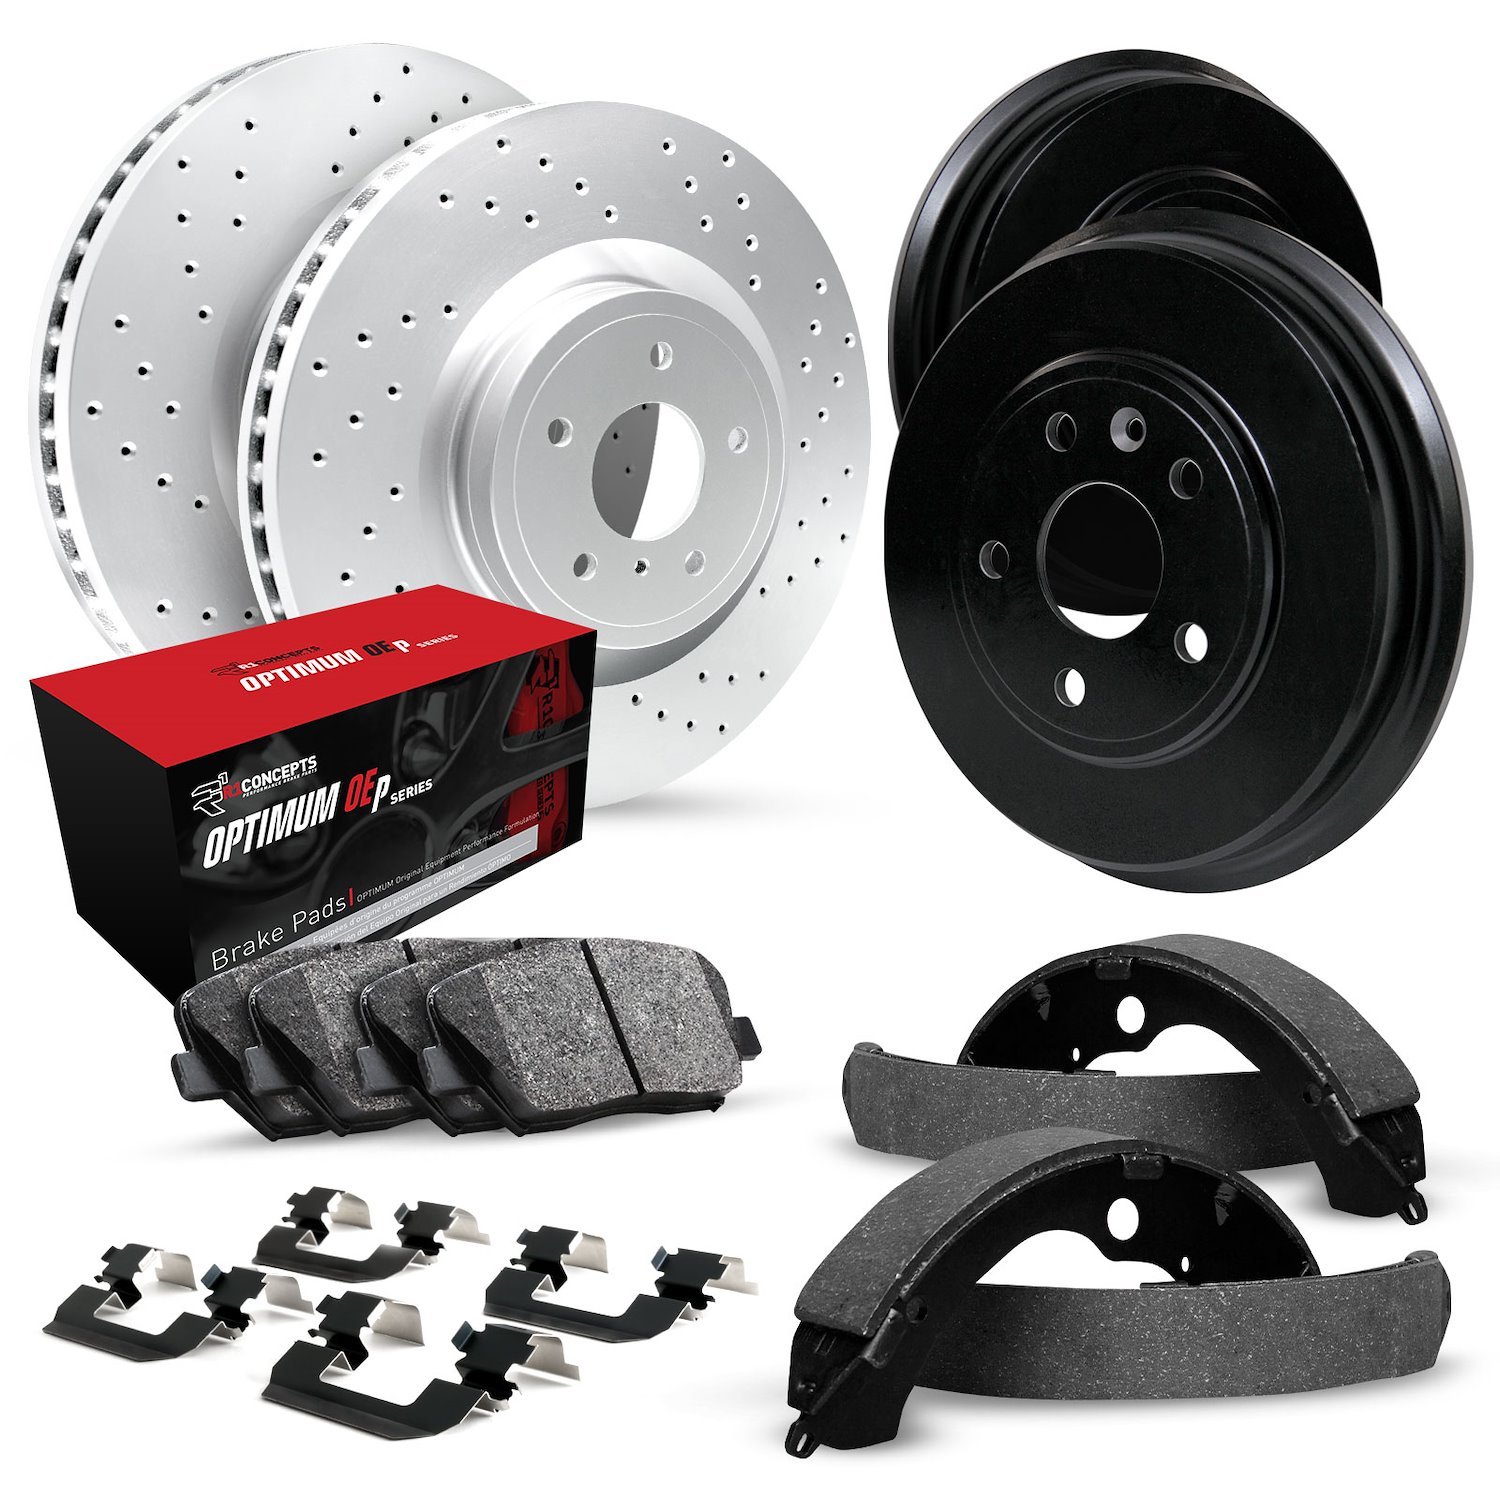 GEO-Carbon Drilled Brake Rotor & Drum Set w/Optimum OE Pads, Shoes, & Hardware, 1978-1990 GM, Position: Front & Rear